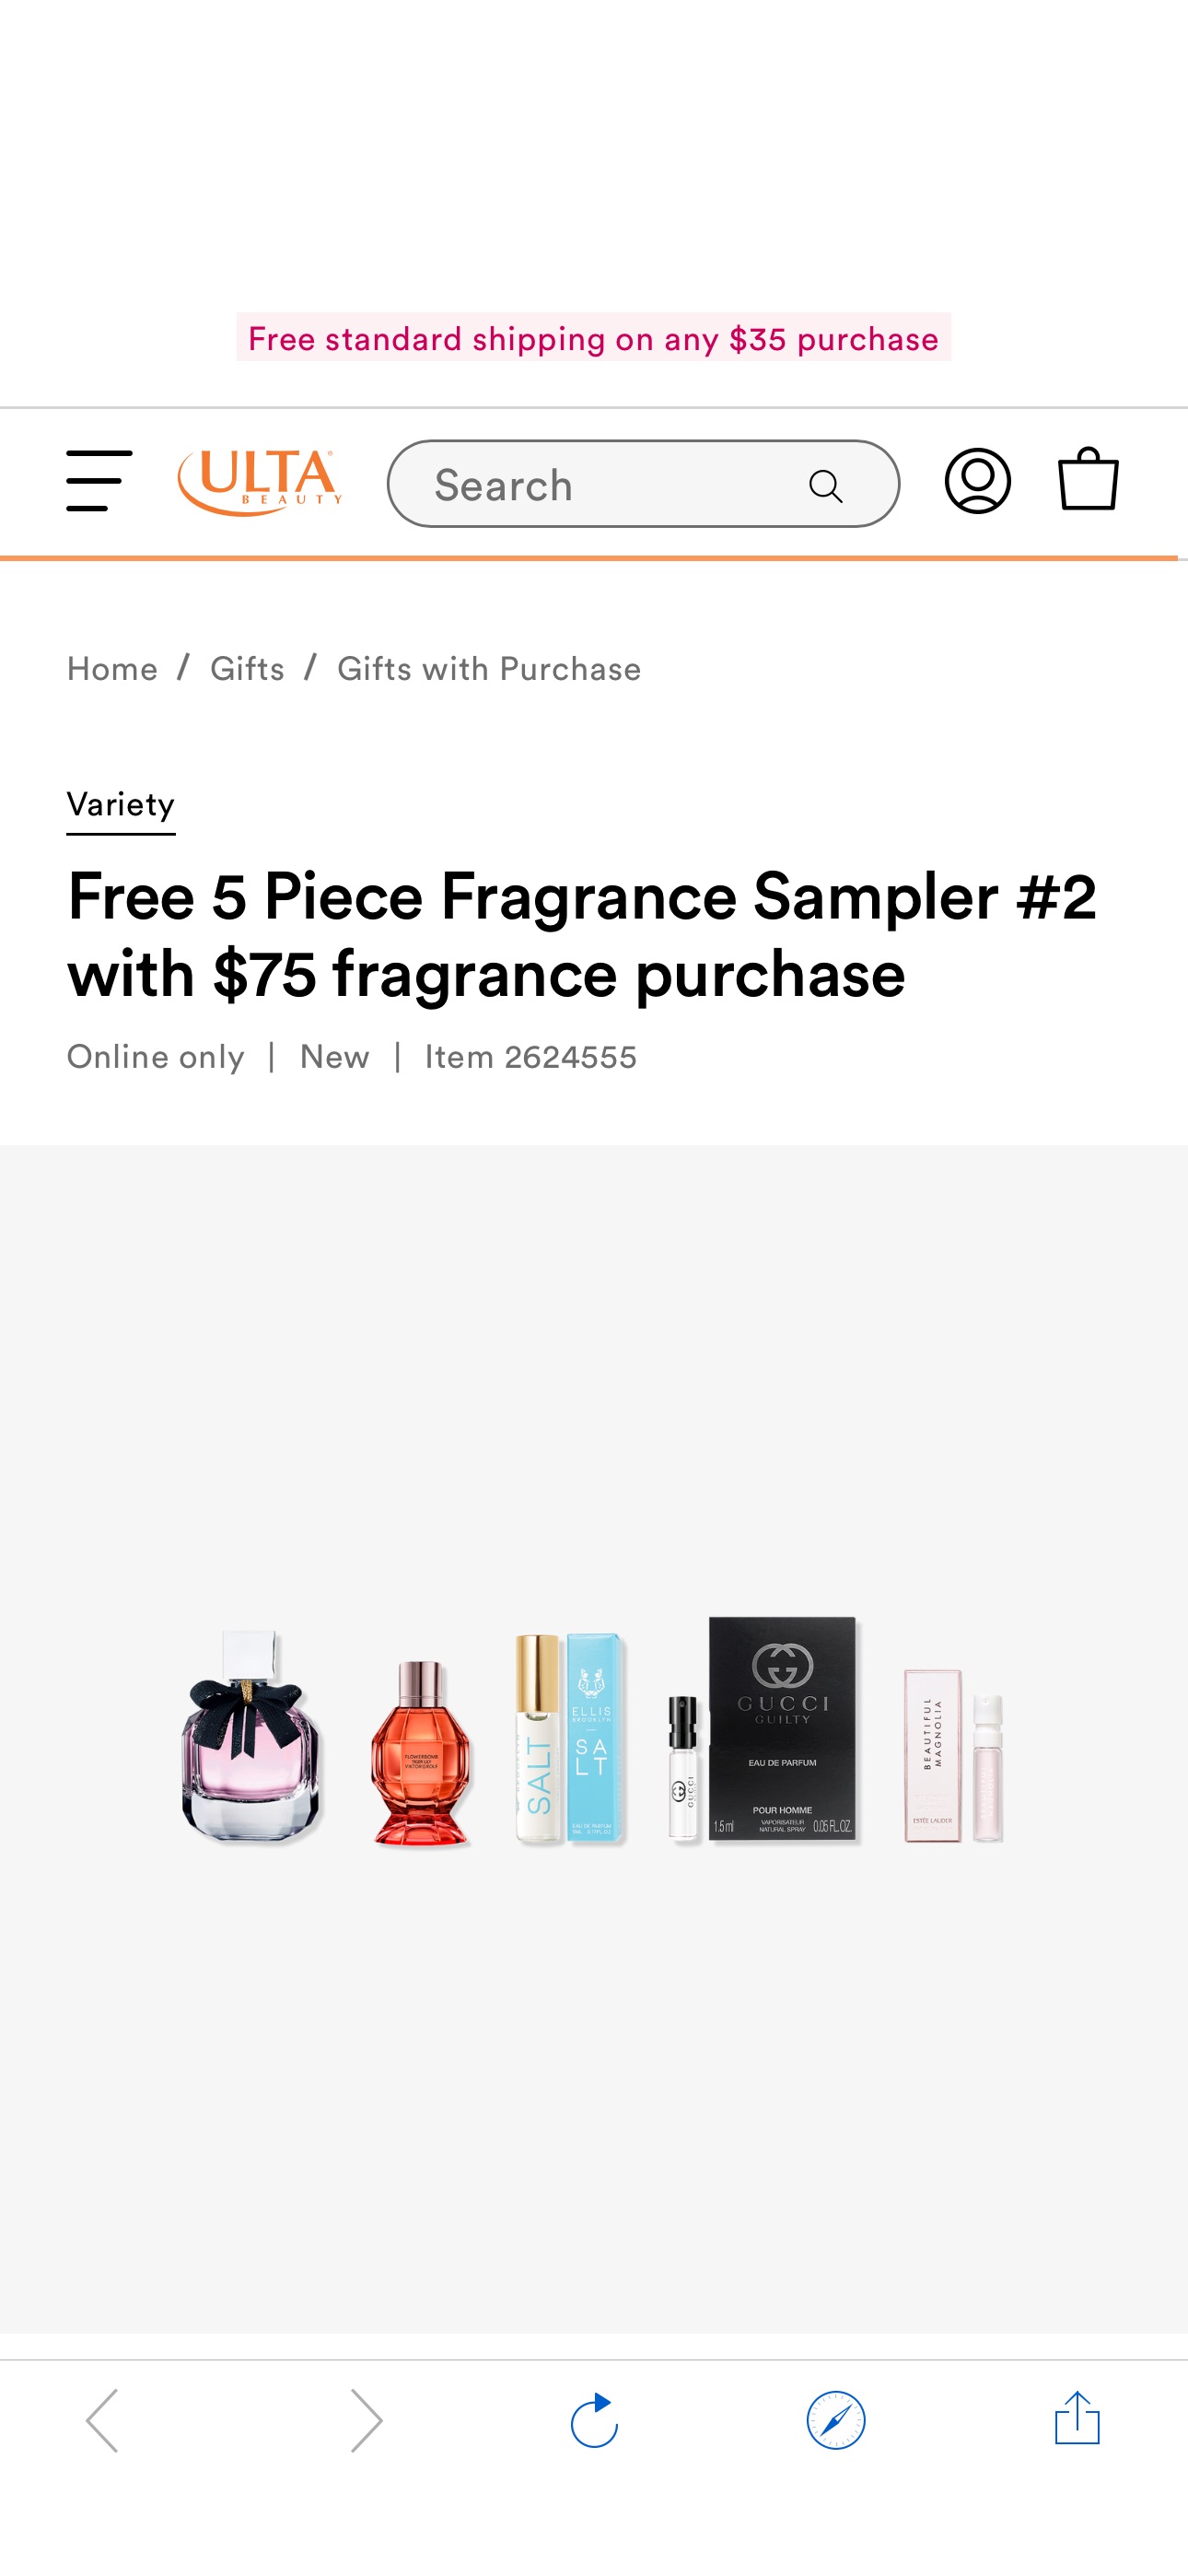 Free 5 Piece Fragrance Sampler #2 with $75 fragrance purchase - Variety | Ulta Beauty